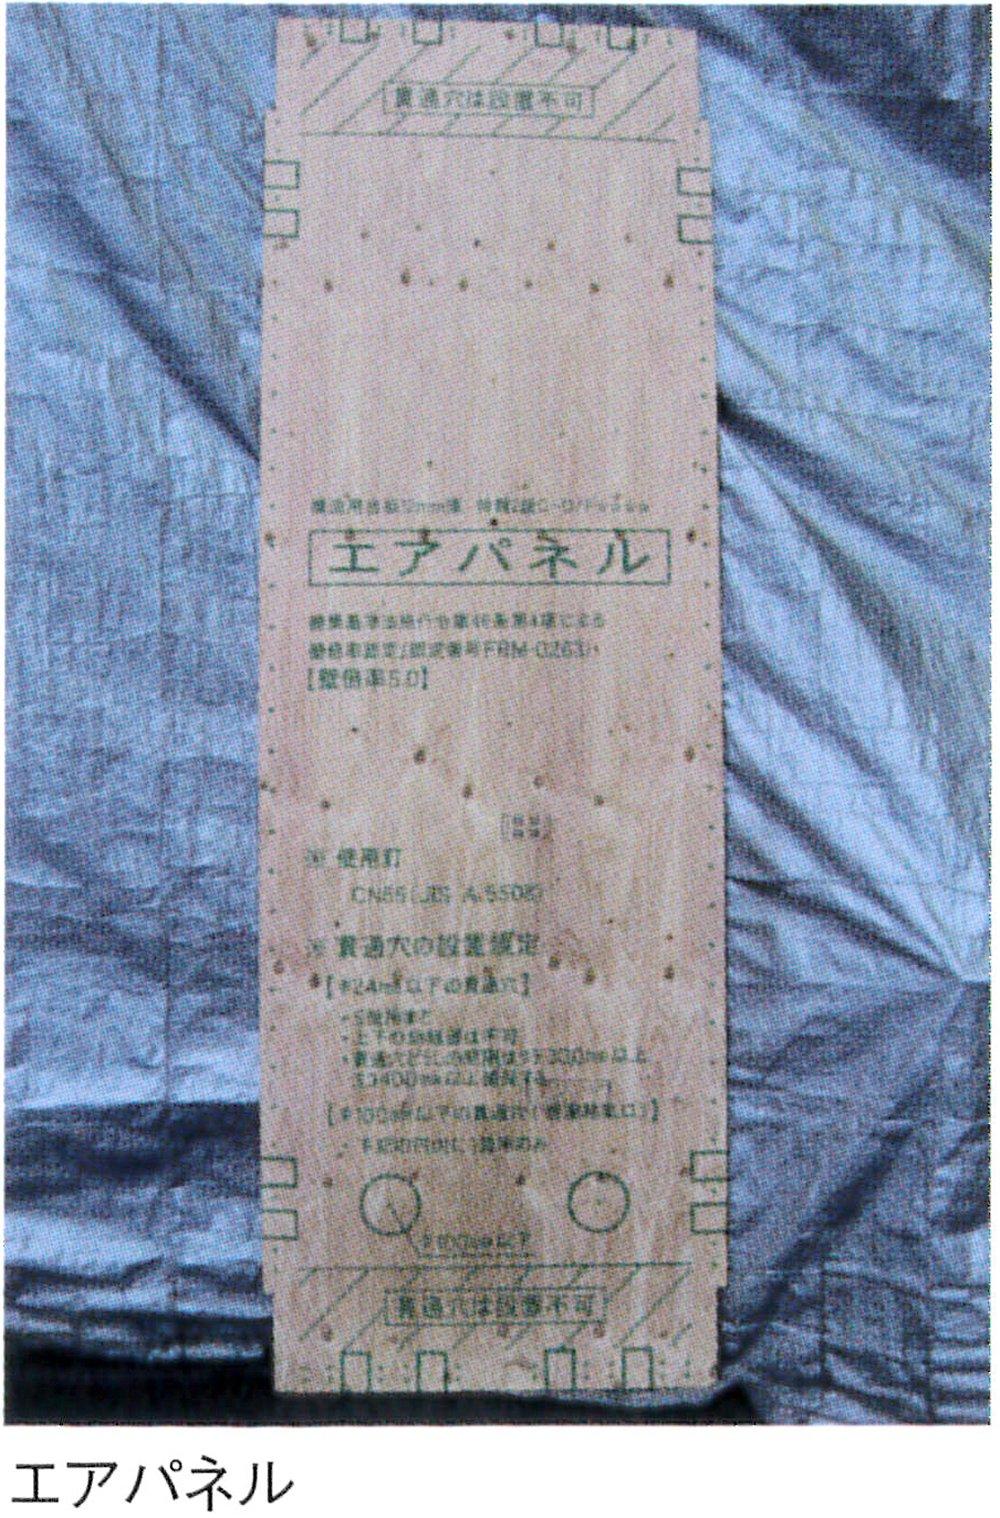 Other. It is a load-bearing wall "air panel is, 2000 Building Standards Law amended, To get Japan's first Minister of Land, Infrastructure and Transport certification for structural strength major Jikukumi etc., Provisions on, With a strength of more than this "load-bearing wall" is not in the world! 